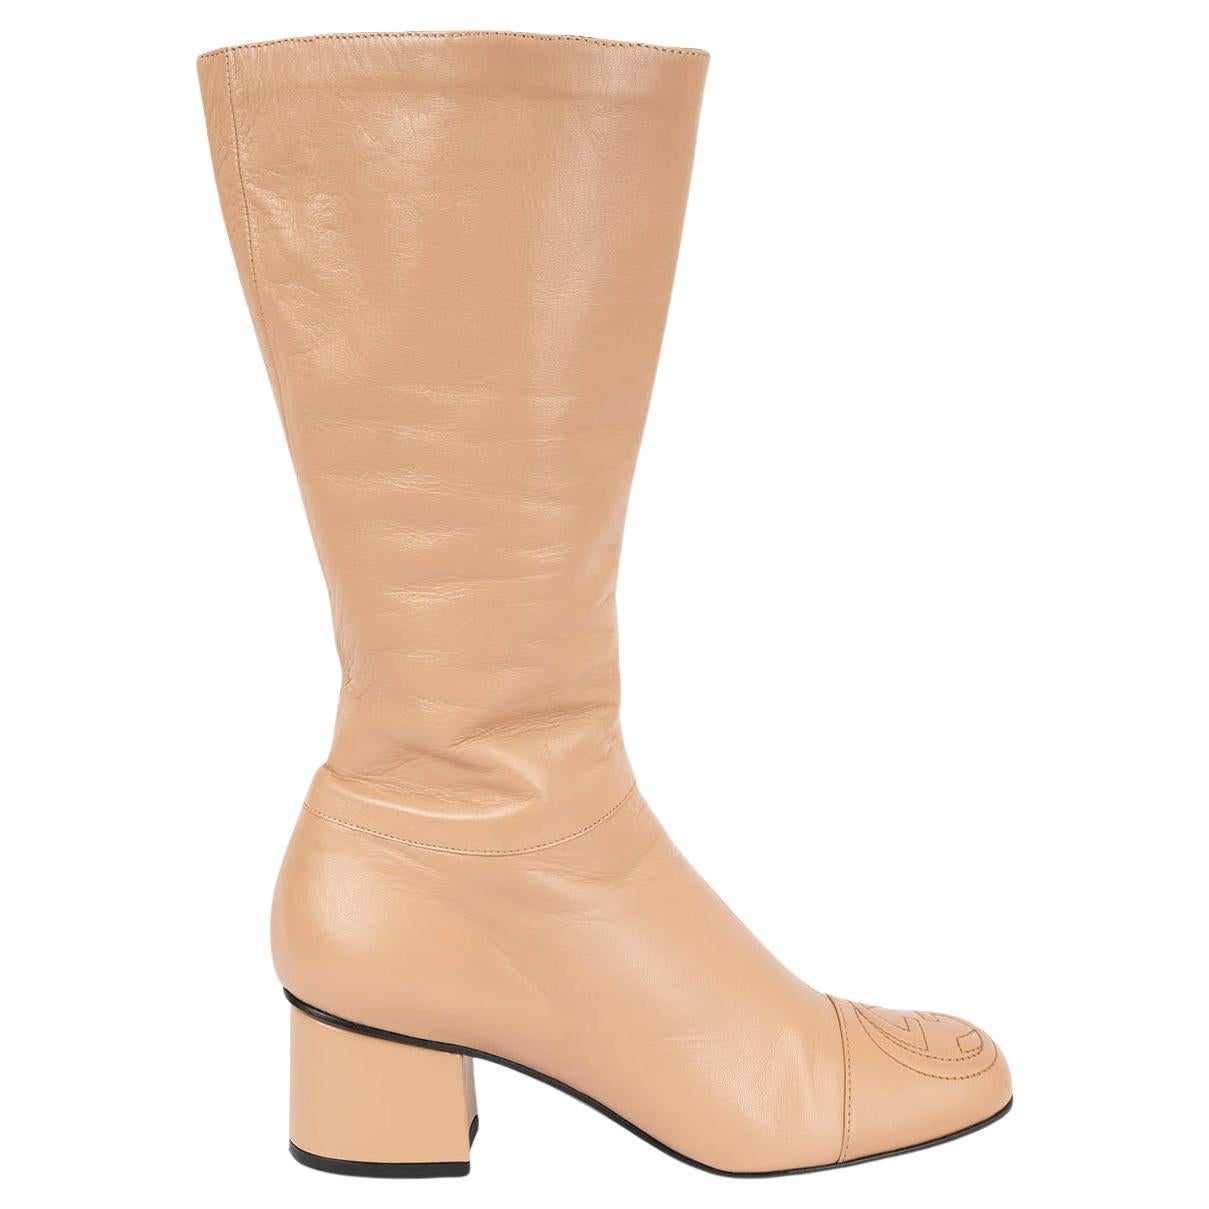 GUCCI tan beige leather SOHO GG BLOCK HEEL MID CALF Boots Shoes 37 For Sale